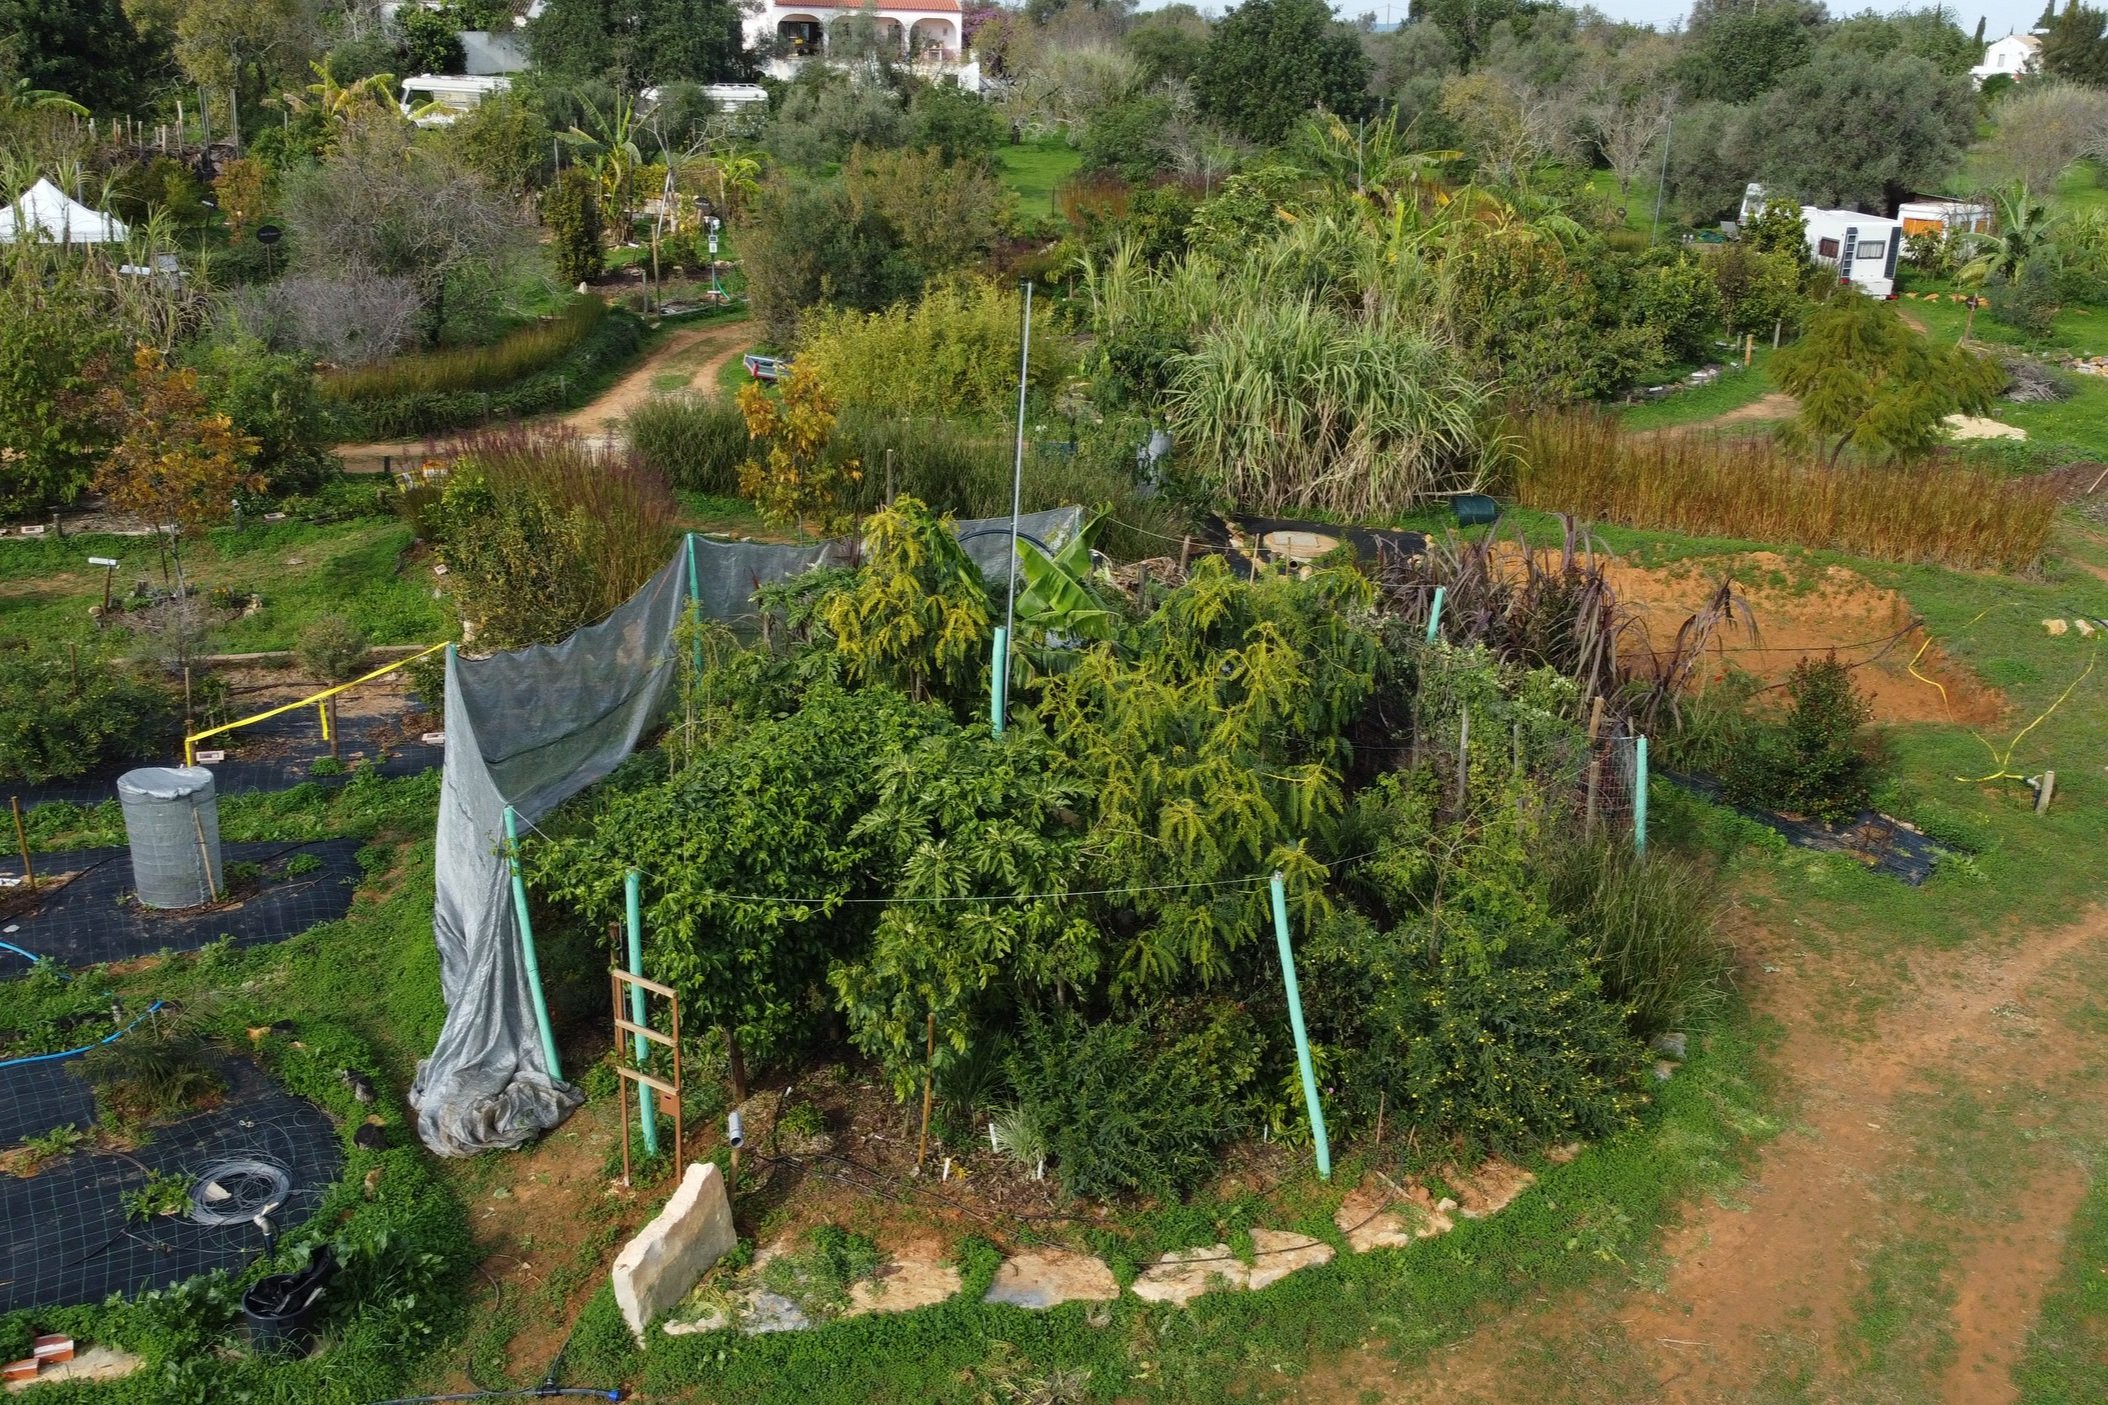 December 2023, 6 months after planting, a look at the Miyawaki Food Forest experiment #3 from the air, using a drone